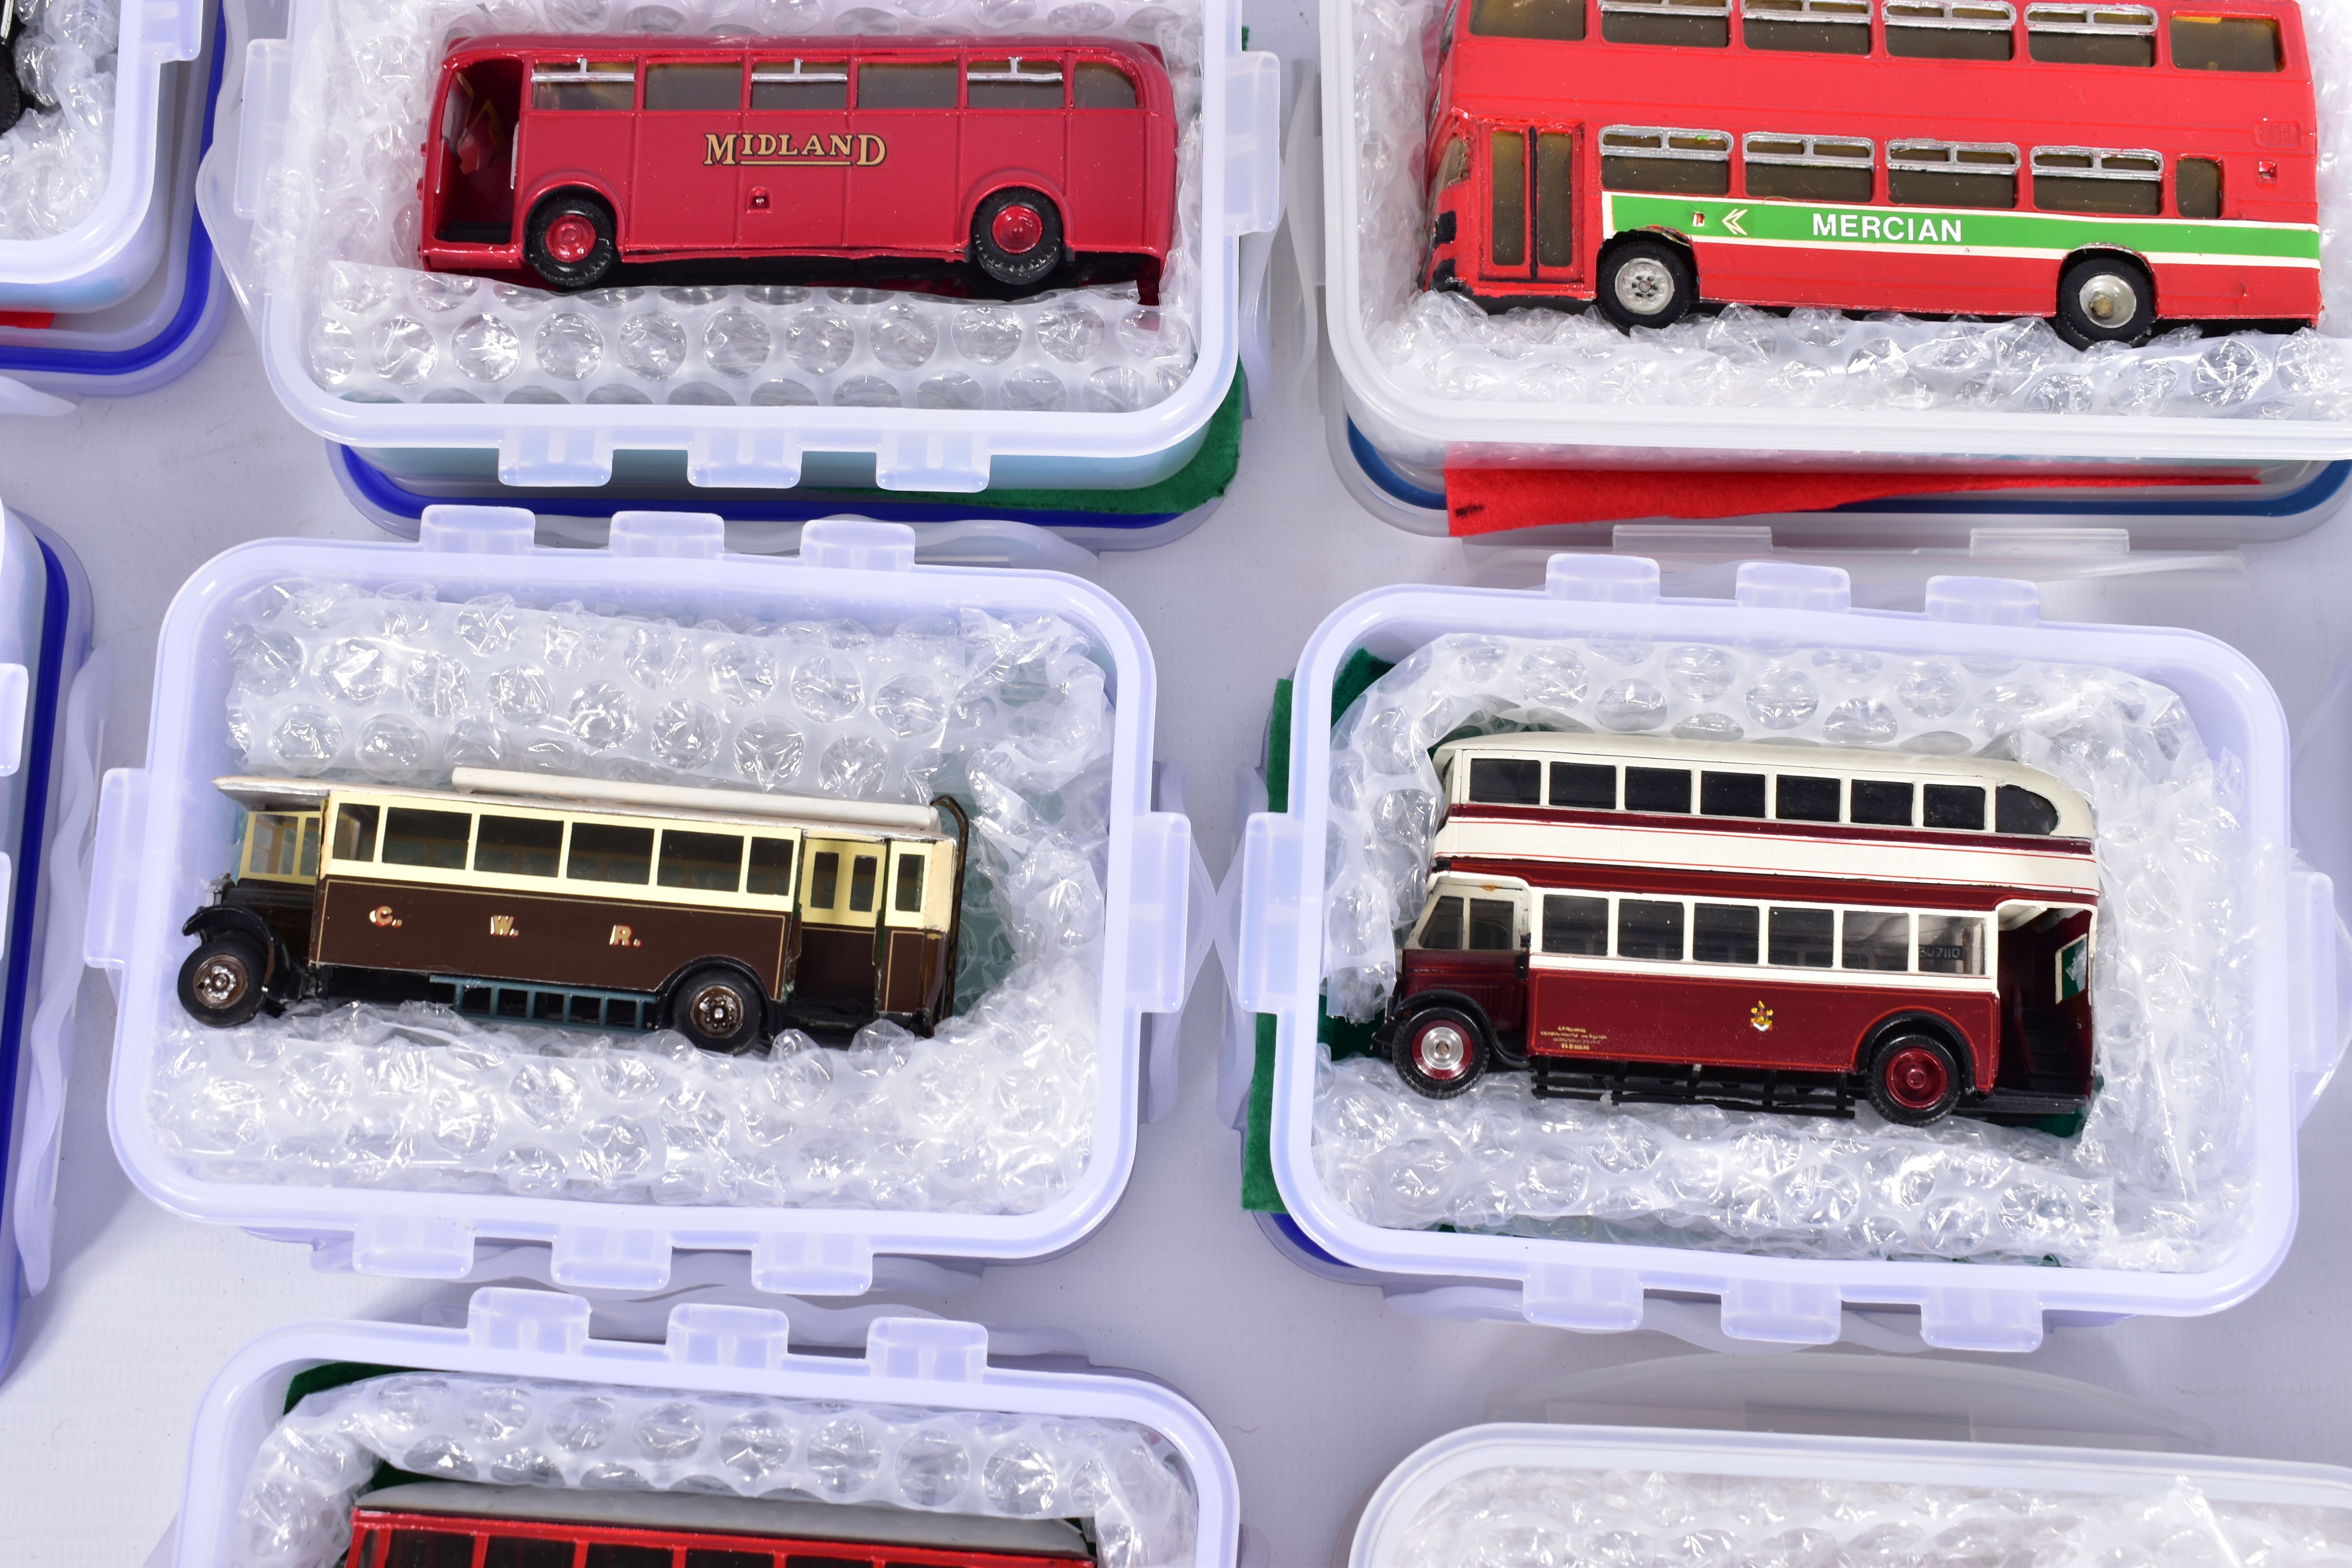 A COLLECTION OF CONSTRUCTED WHITEMETAL KIT MIDLAND RED BUS MODELS, all are 1/76 scale kit models and - Image 4 of 11